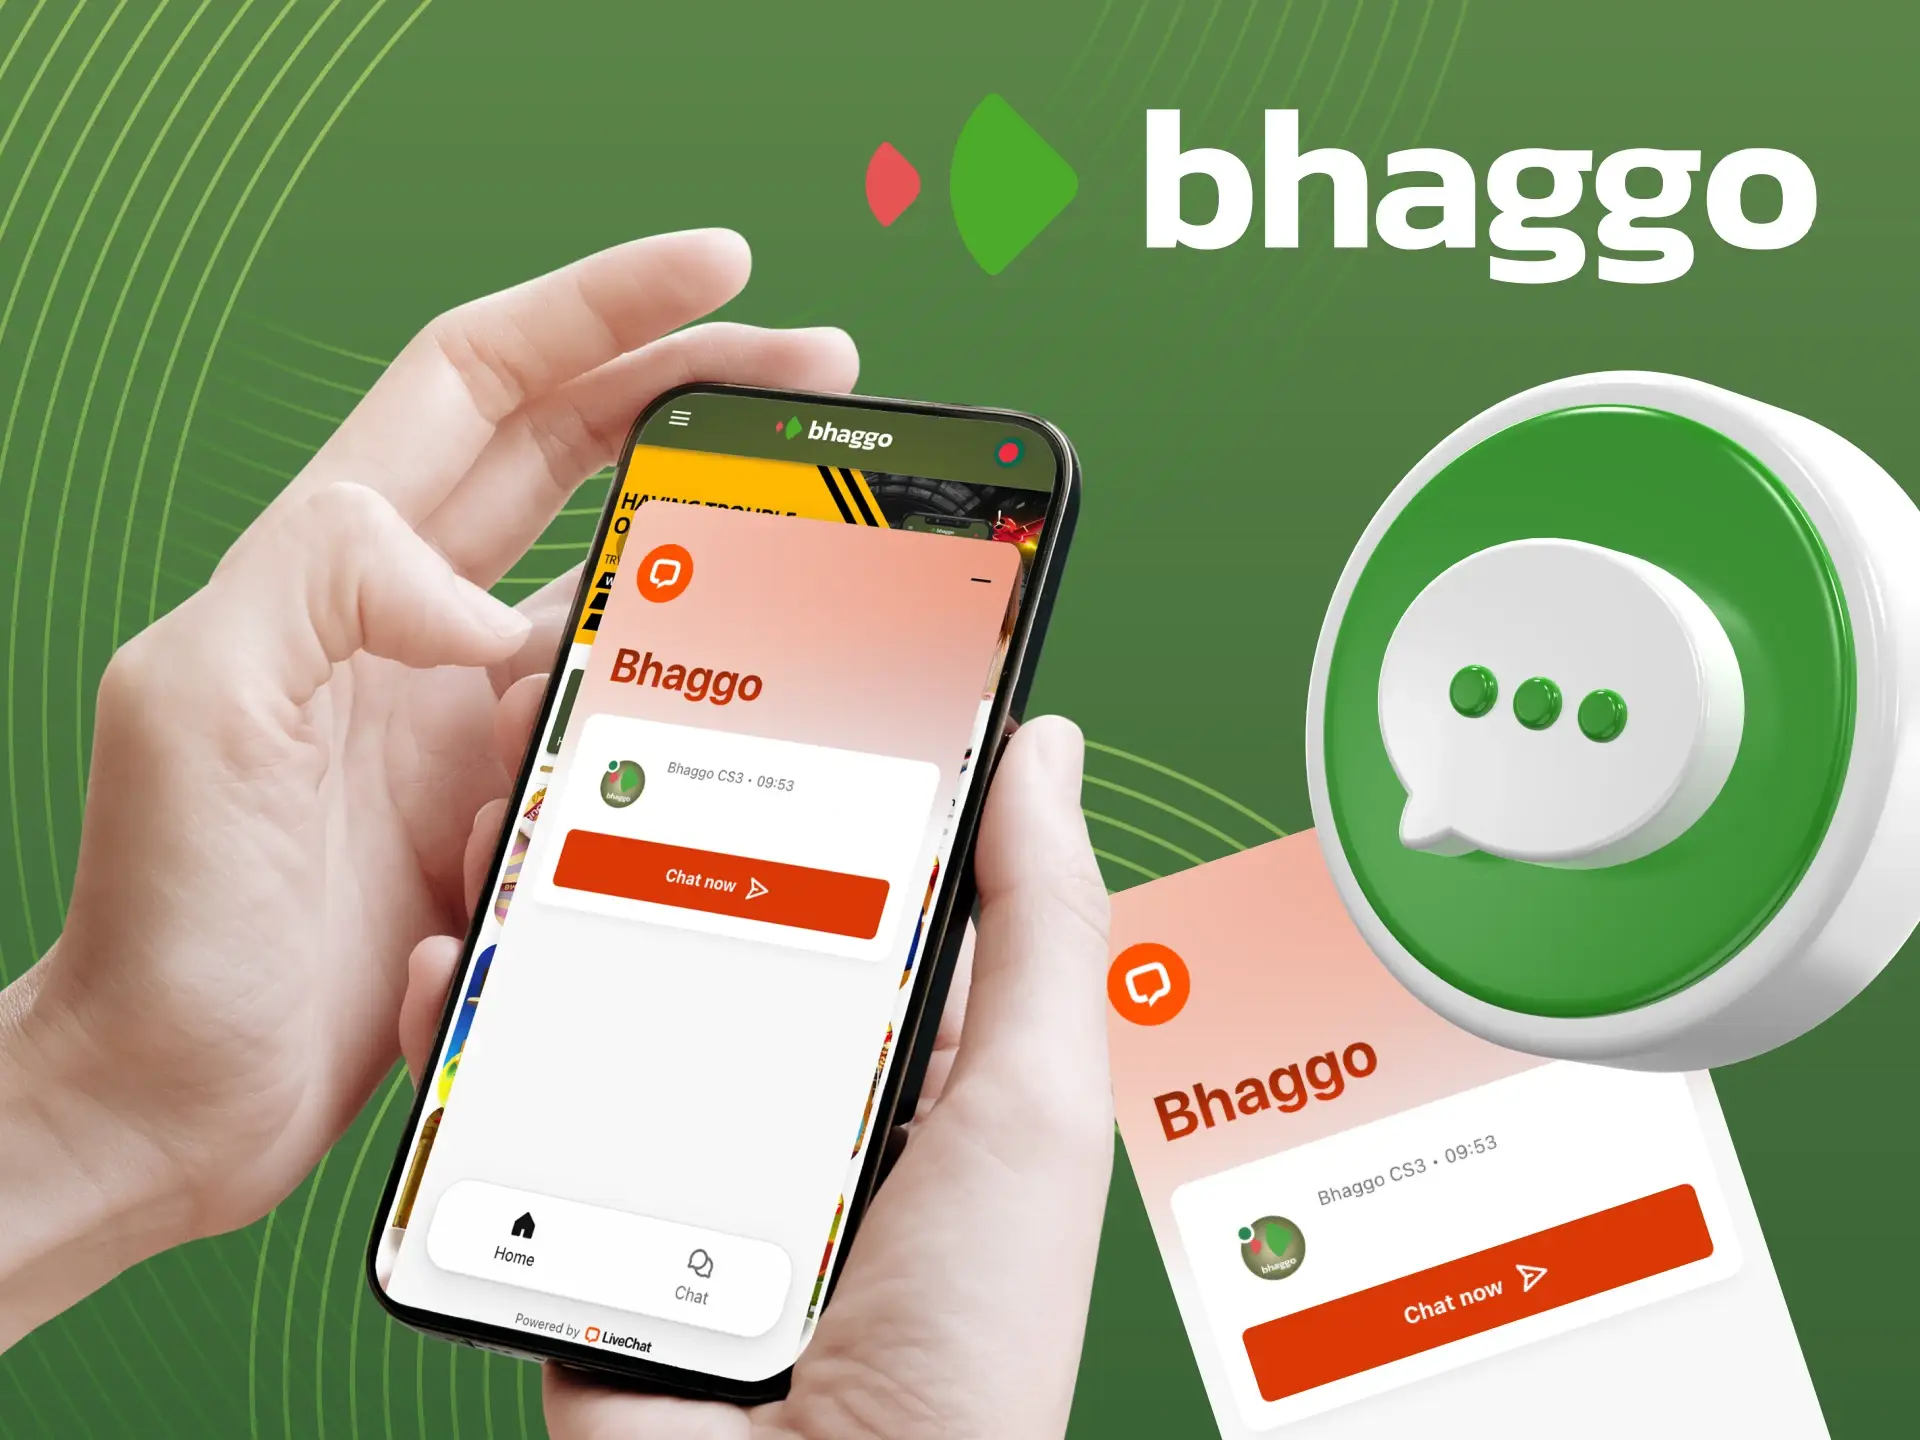 Where can I write to Bhaggo online casino support.